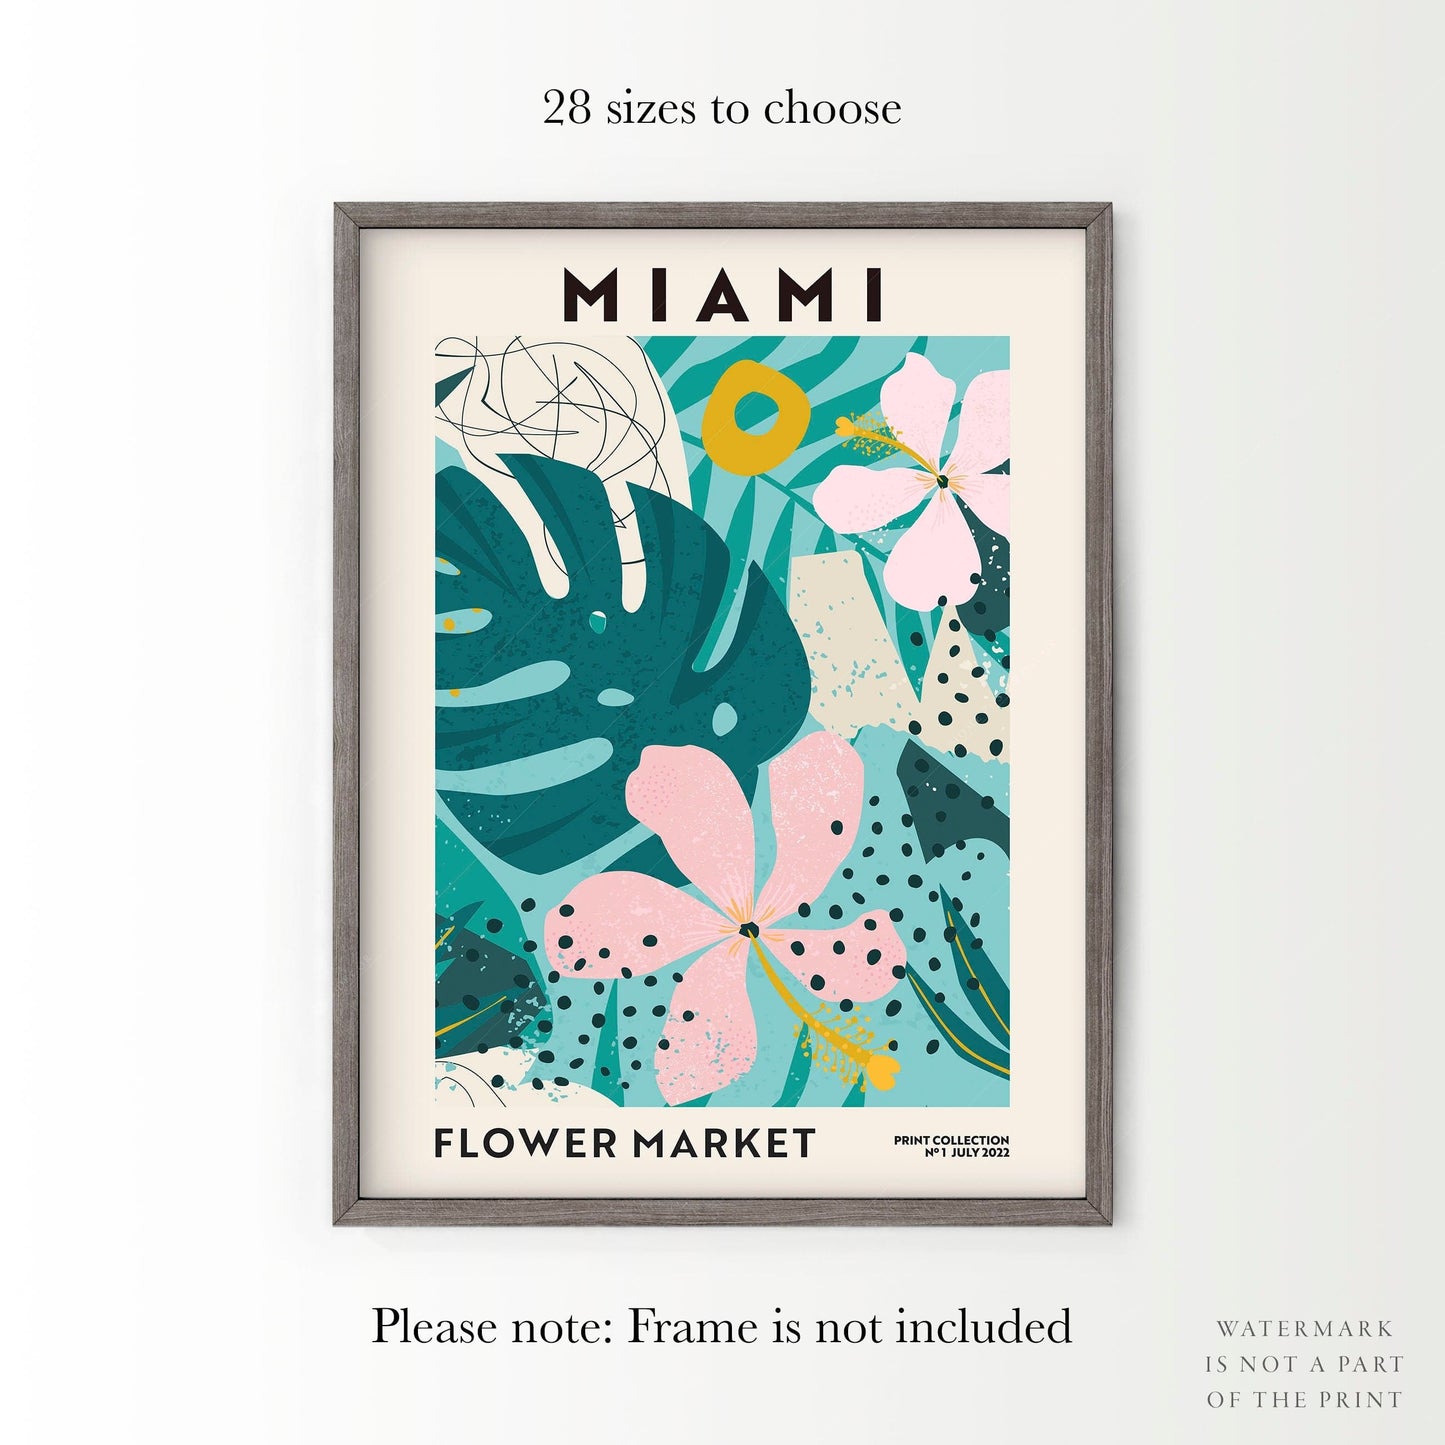 Home Poster Decor Single Flower Market Miami, Floral Shop Sign, Florida Poster, Beach Decor, Colourful Wall Decor, Boho Floral, Florist Gift, Tropical Leaves Tree